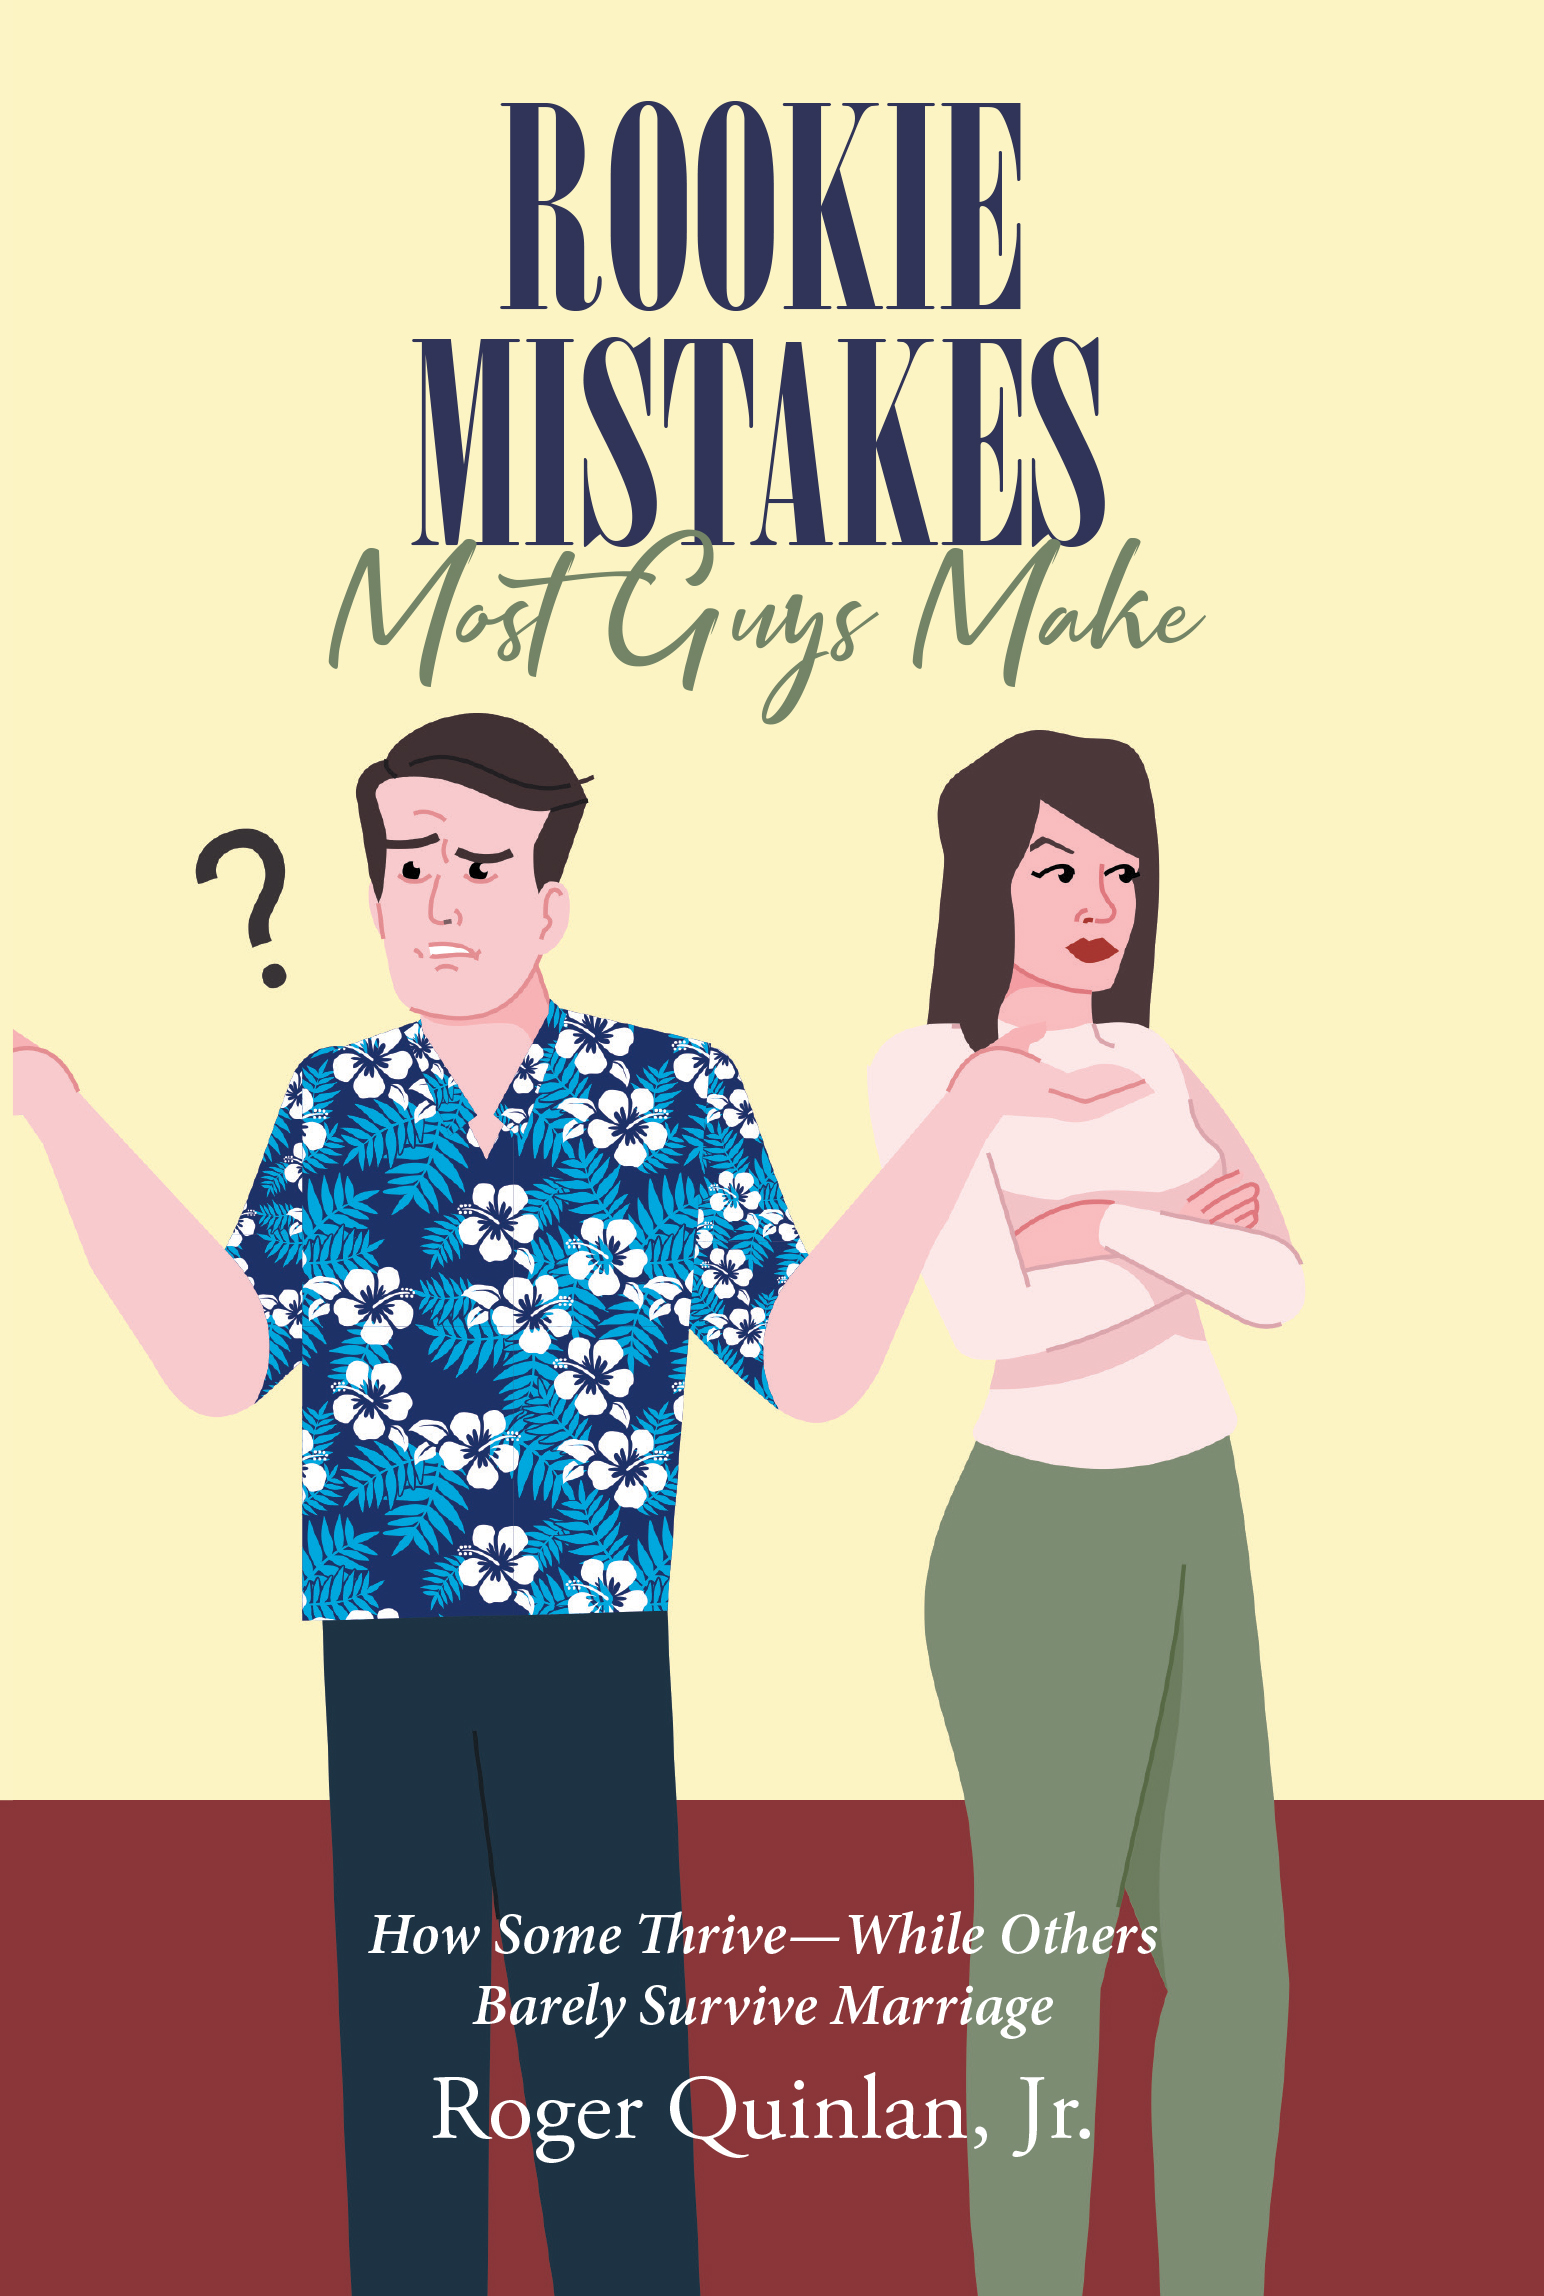 Author Roger Quinlan, Jr.’s New Book, "Rookie Mistake Most Guys Make," is a Thought-Provoking Read That Unveils Key Insights on How to Make a Marriage Thrive